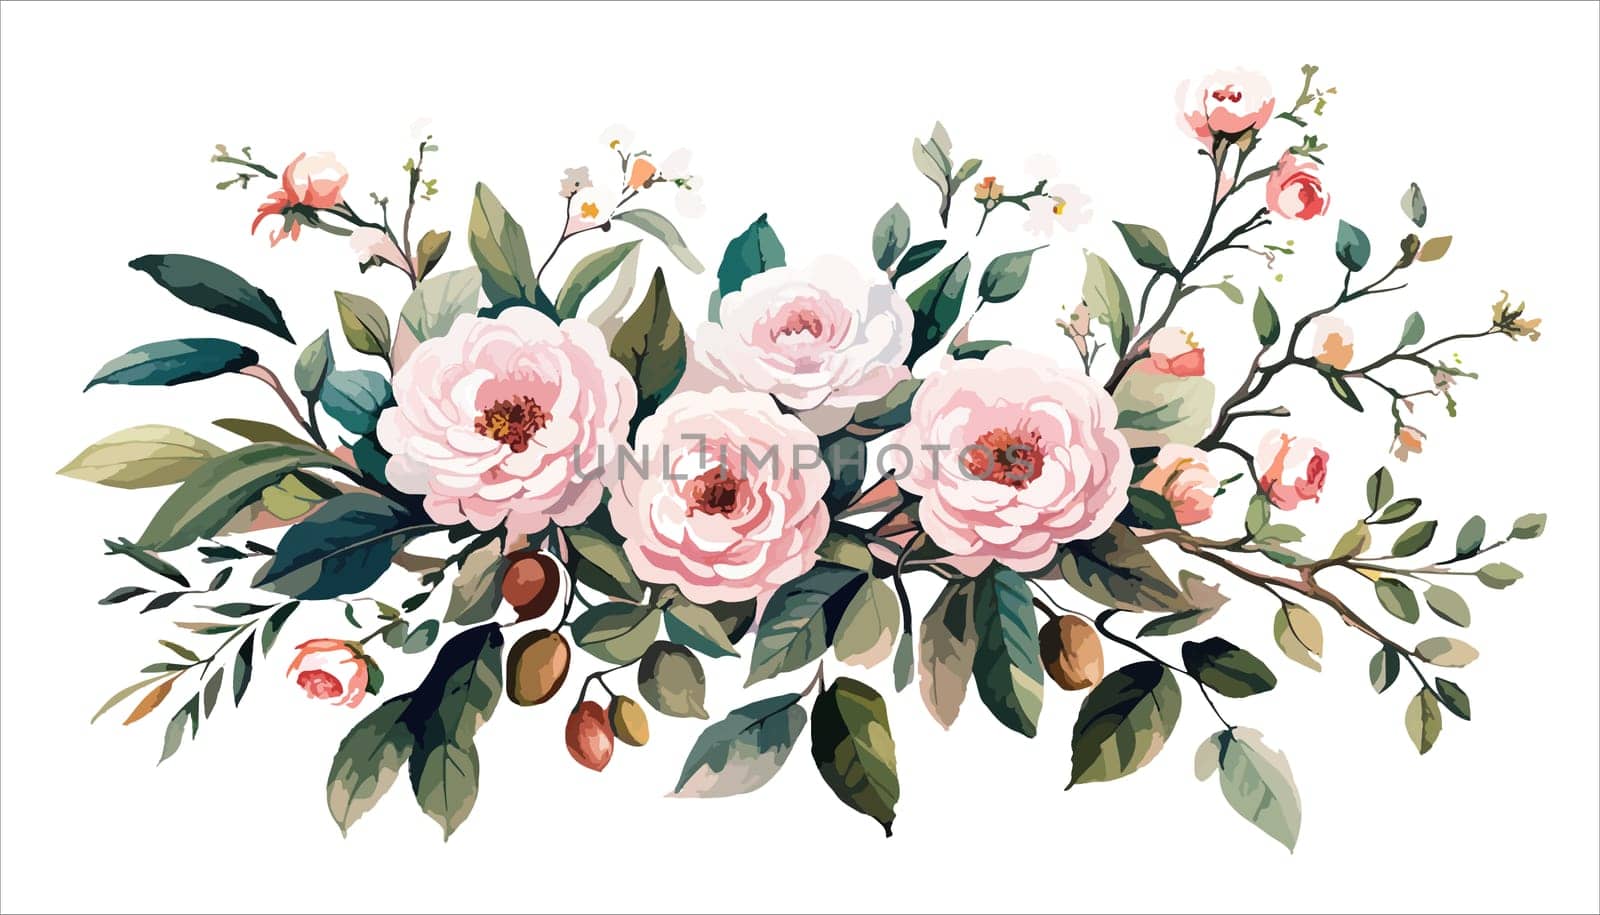 Watercolor flowers pink roses. Floral illustration. Bouquet flowers pink rose. Design arrangements for textile, greeting card. Abstraction branch of flowers isolated on white background.